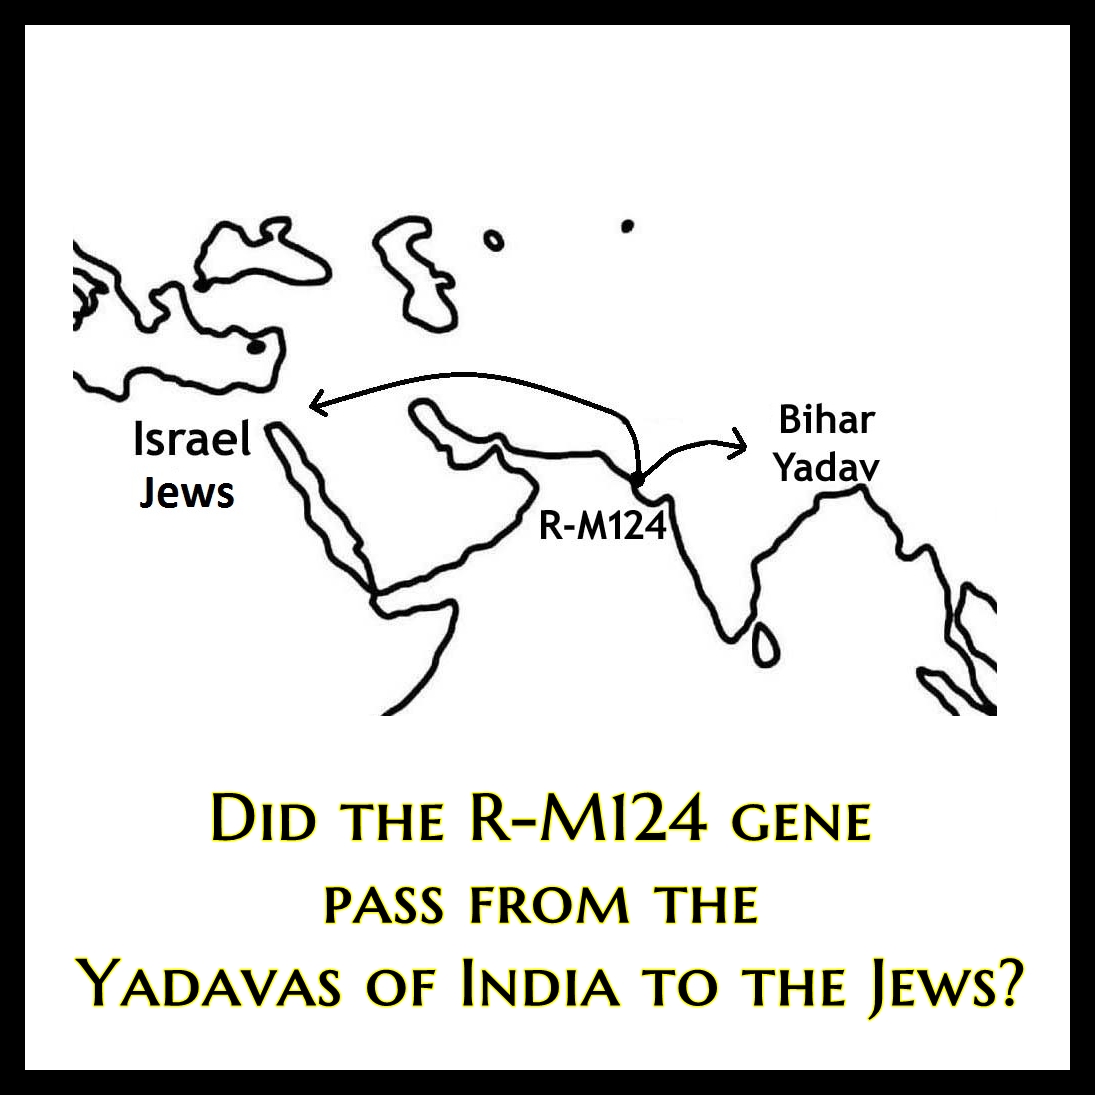 Jew and Yadav connection